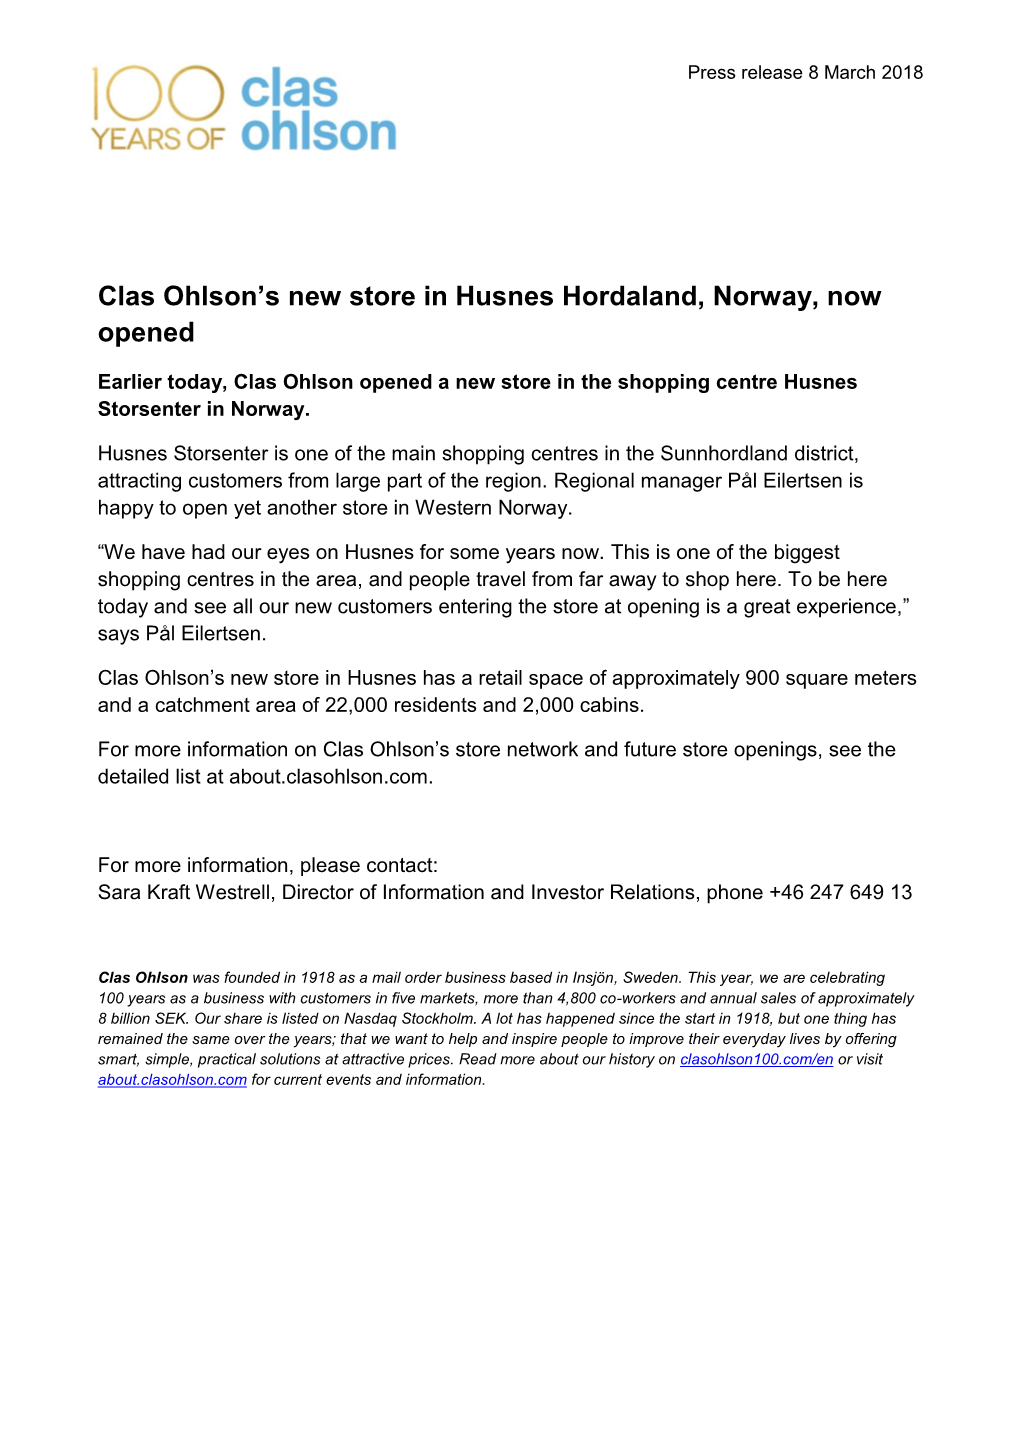 Clas Ohlson's New Store in Husnes Hordaland, Norway, Now Opened